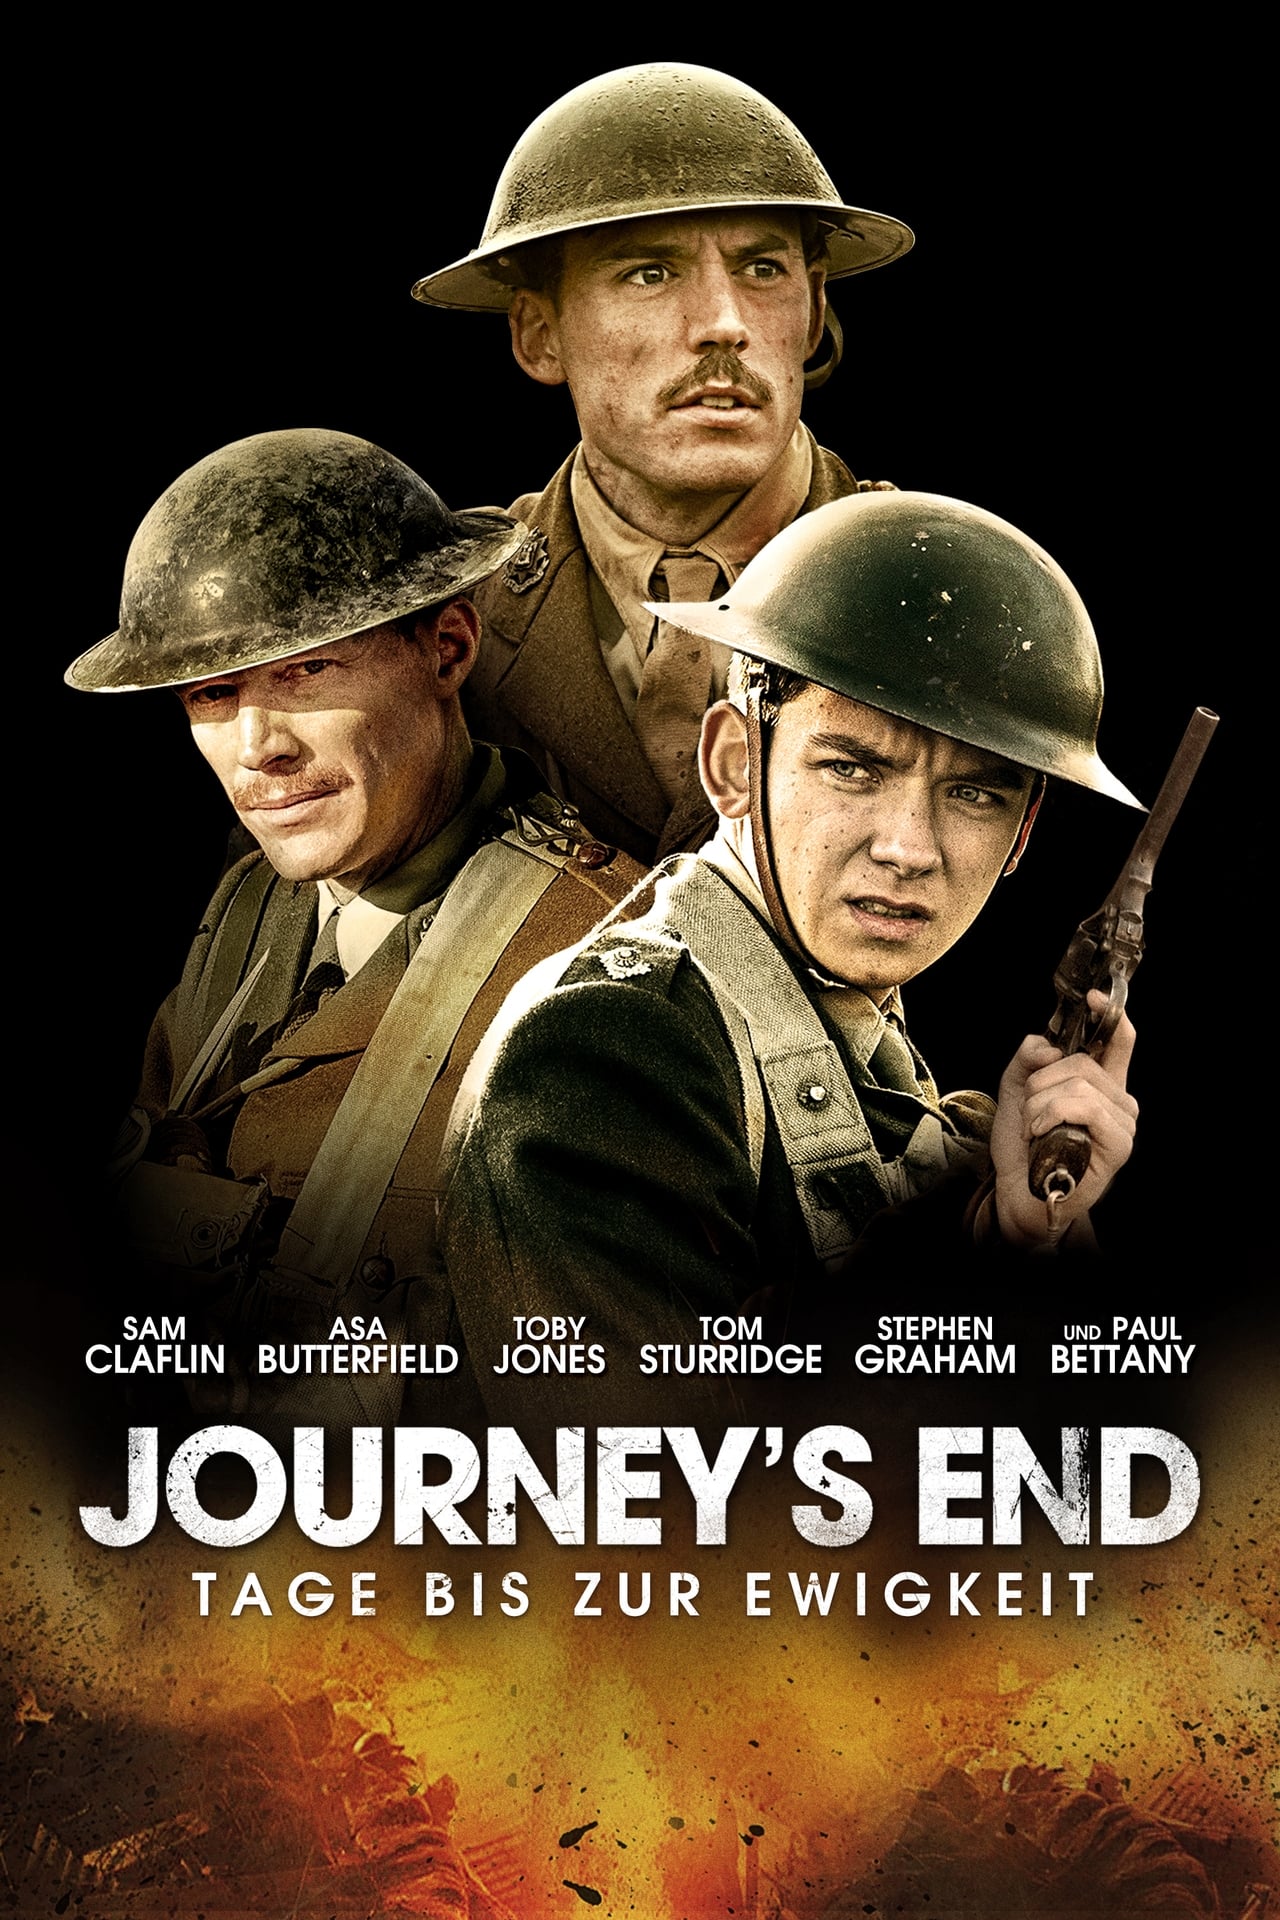 journey's end book themes